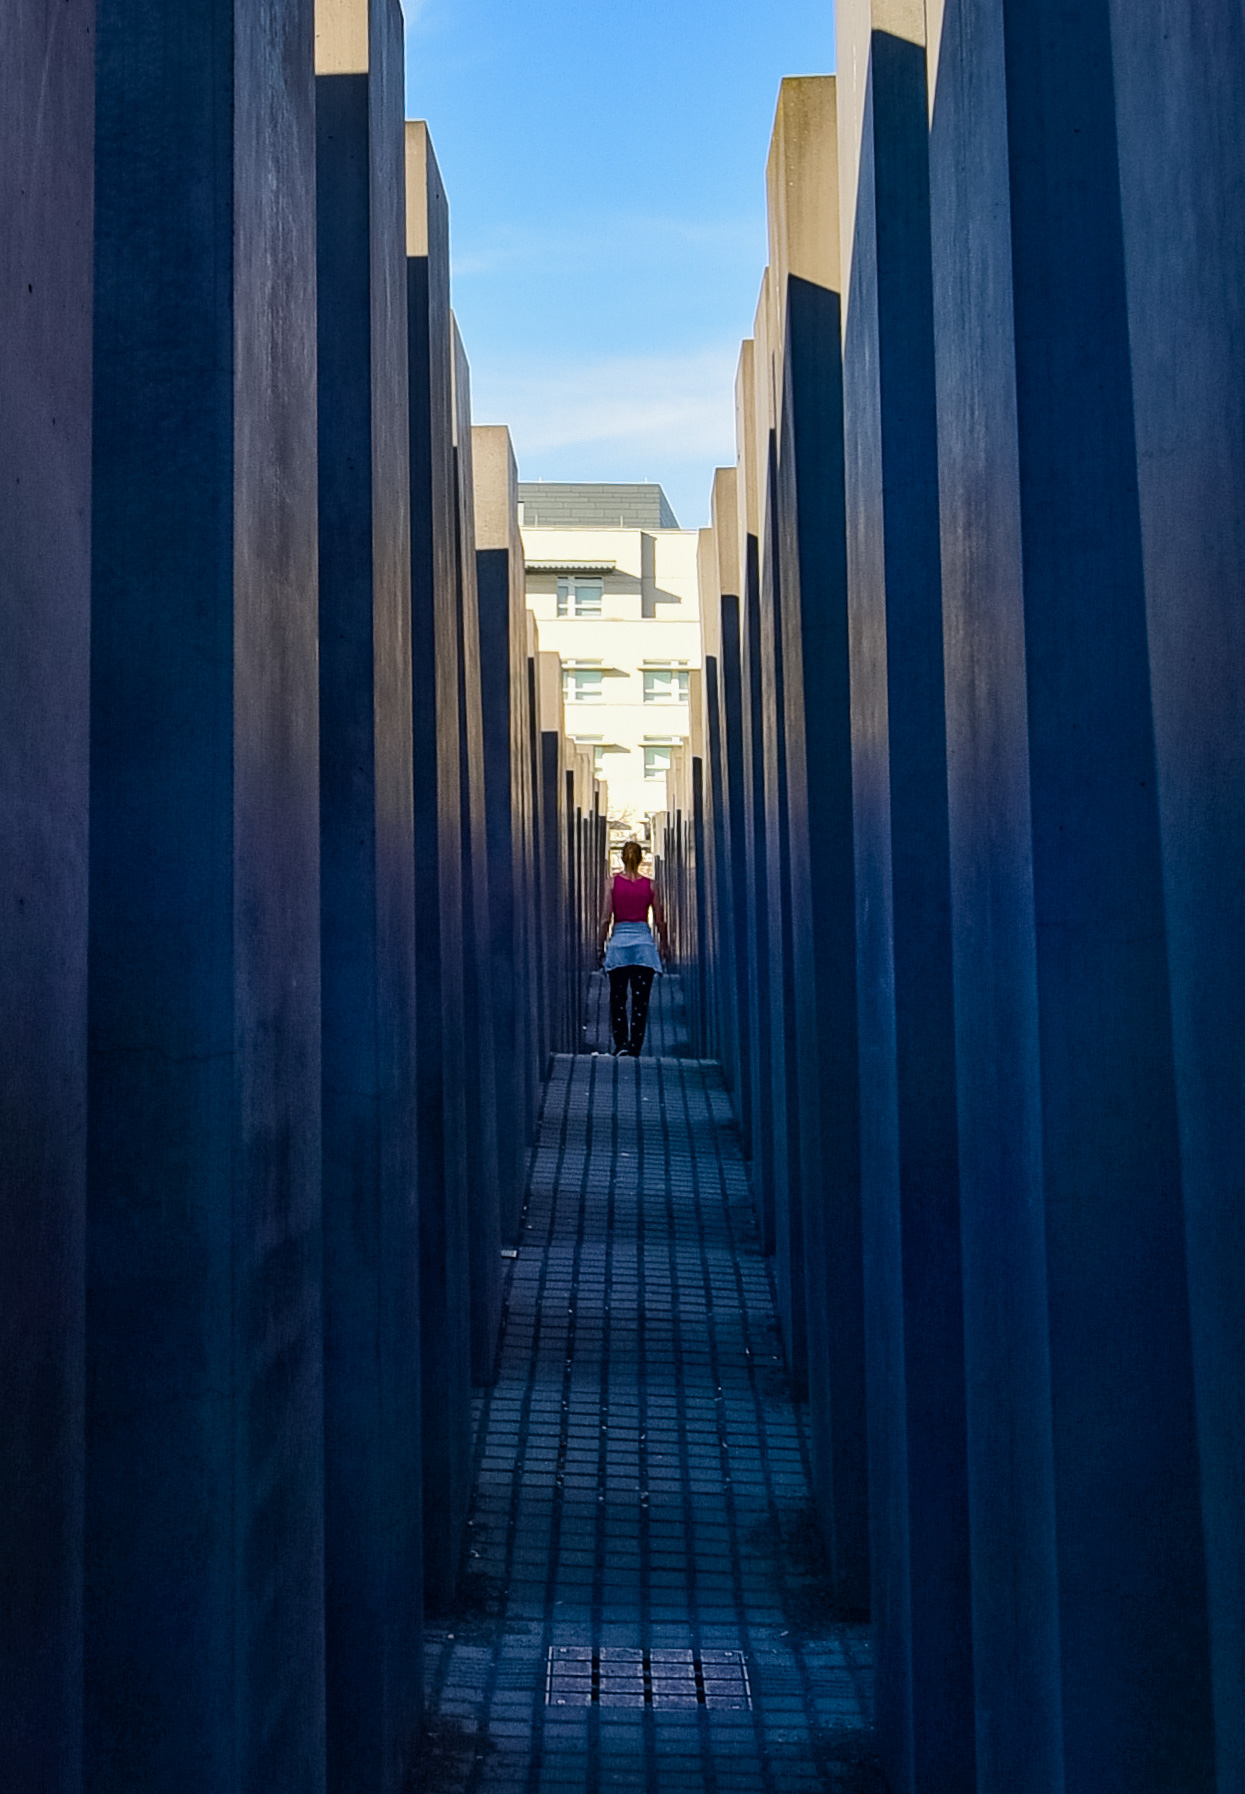 The Holocaust Memorial Berlin By Gerry Phillipson with Editors note.